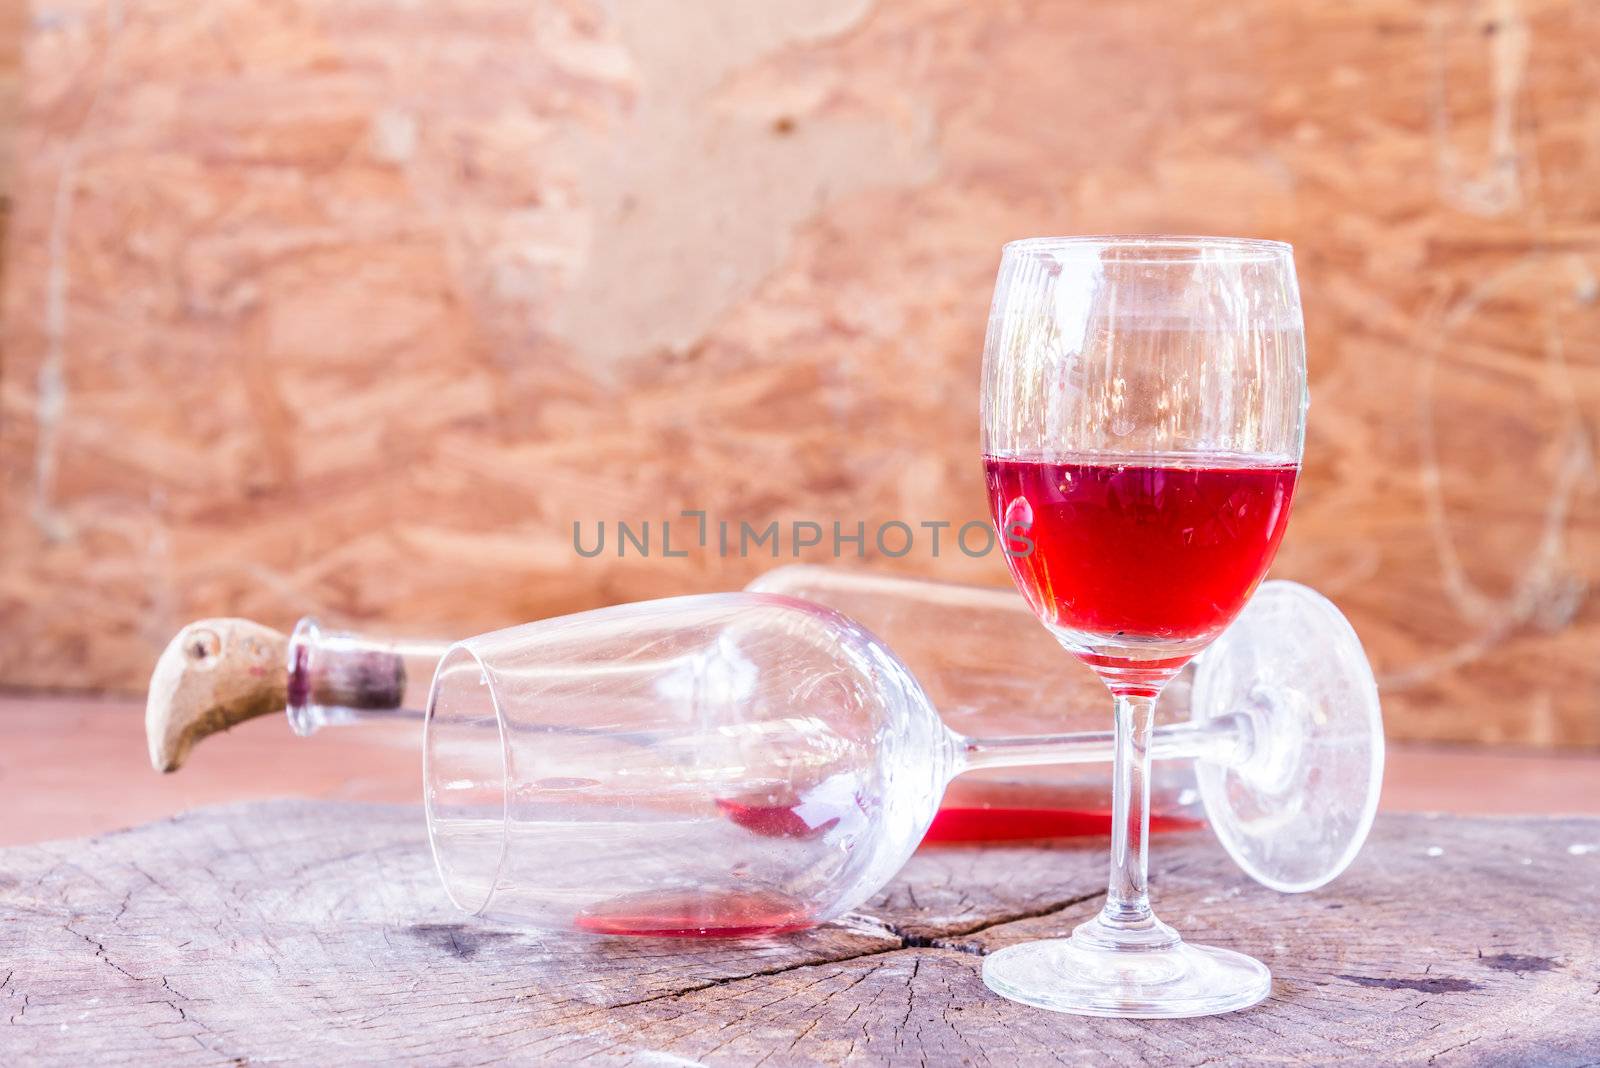 red wine on wooden background still life image by wmitrmatr